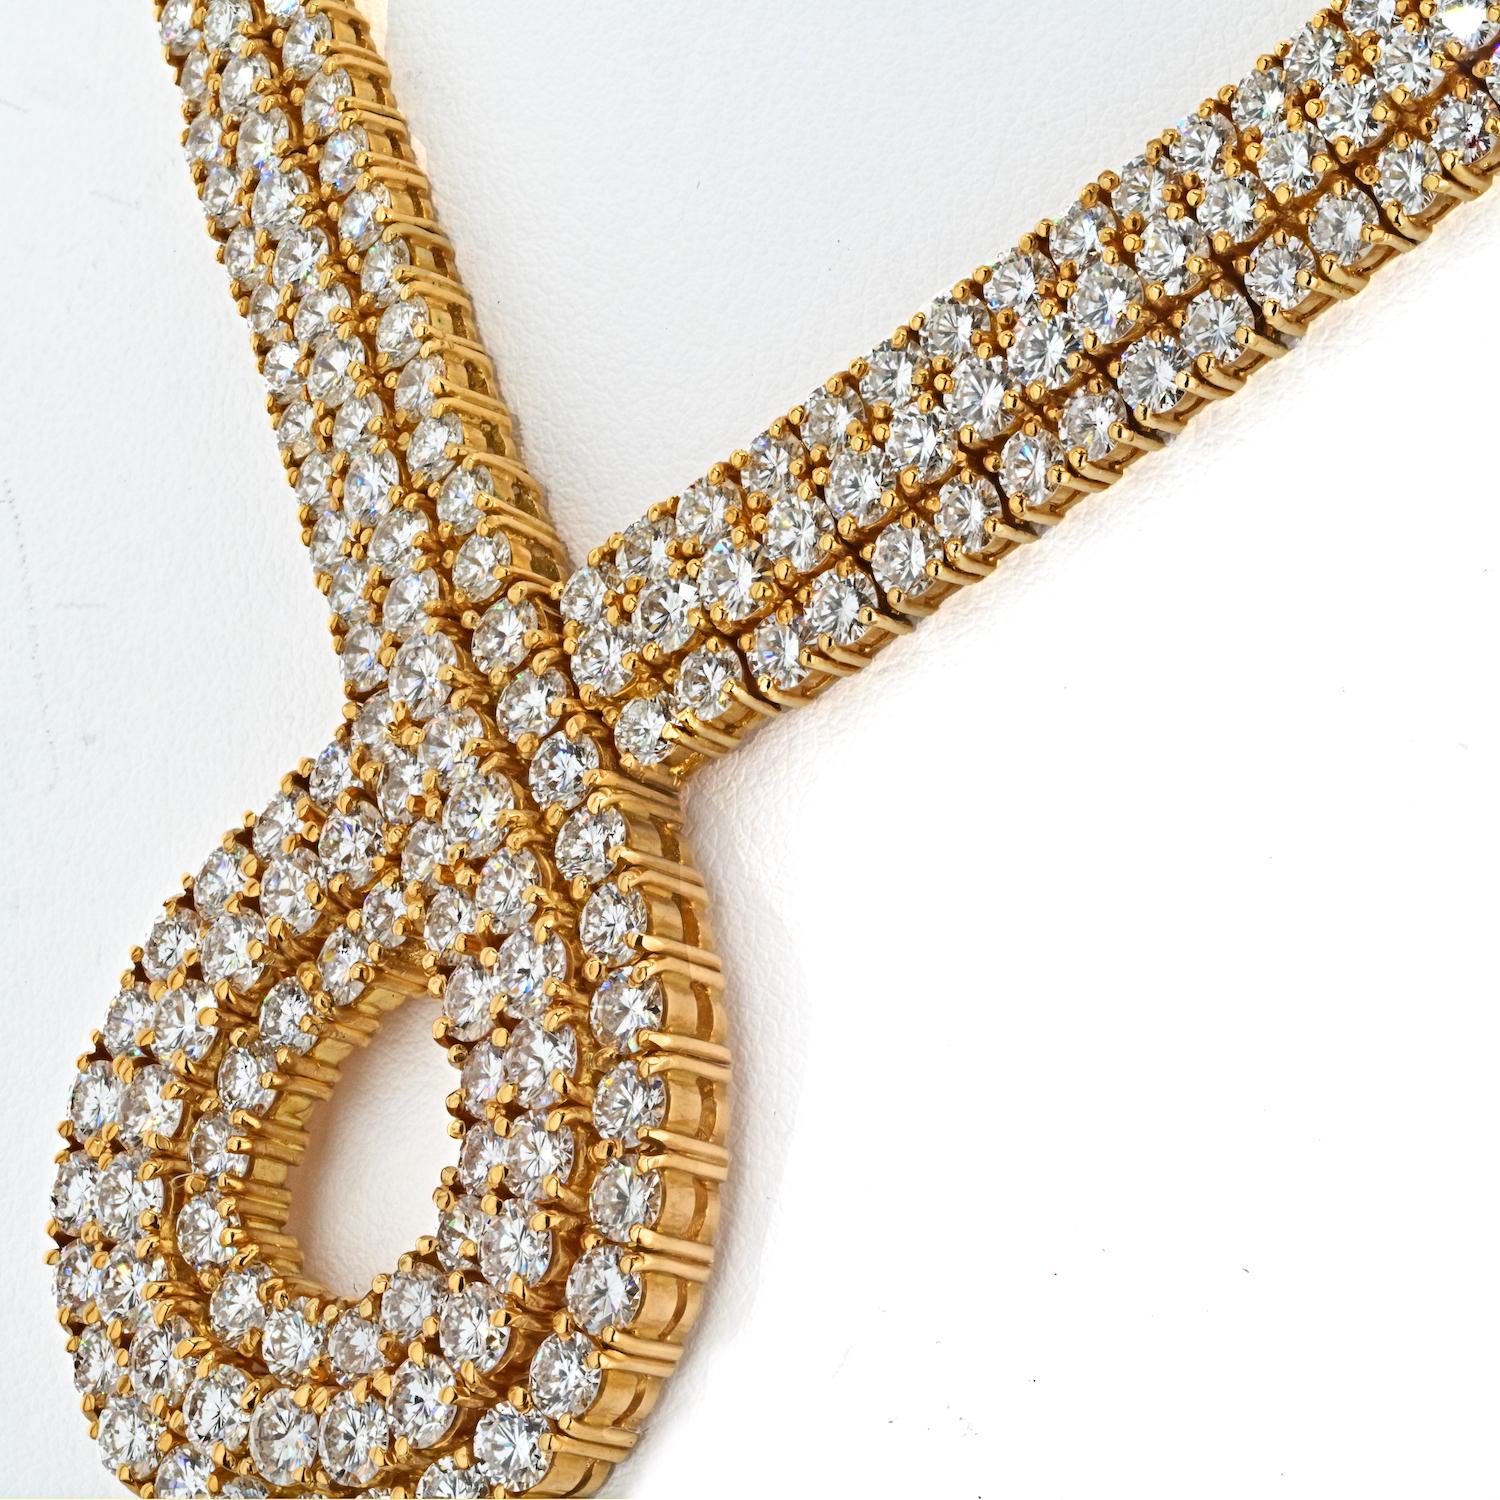 18K Yellow Gold Scrolling At The Front 48.00cttw Diamond Necklace In Excellent Condition For Sale In New York, NY